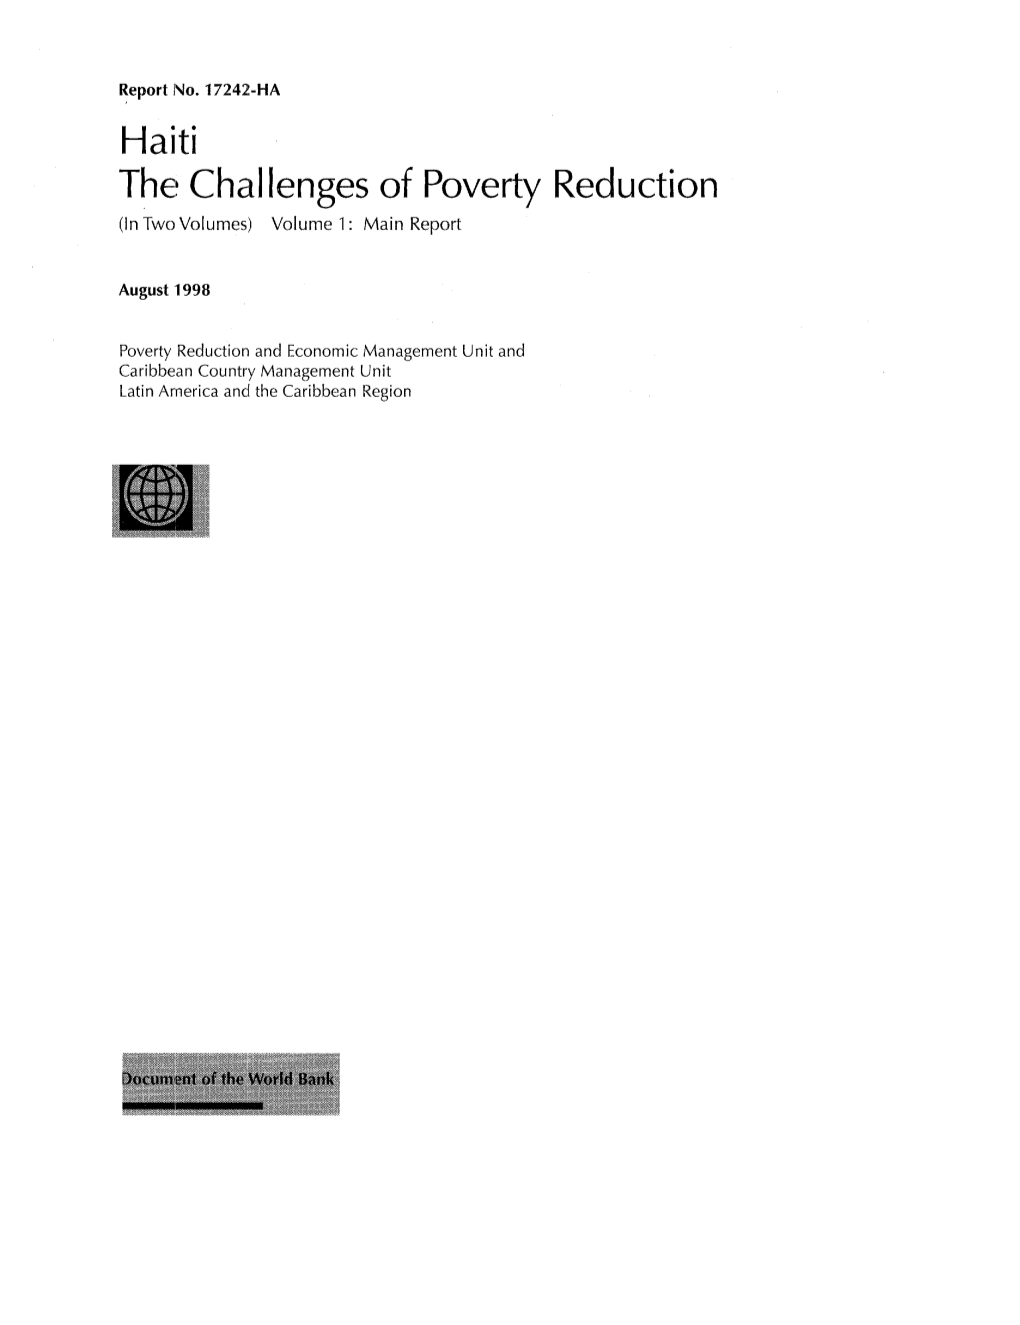 Haiti the Challenges of Poverty Reduction (In Twovolumes) Volume 1: Main Report